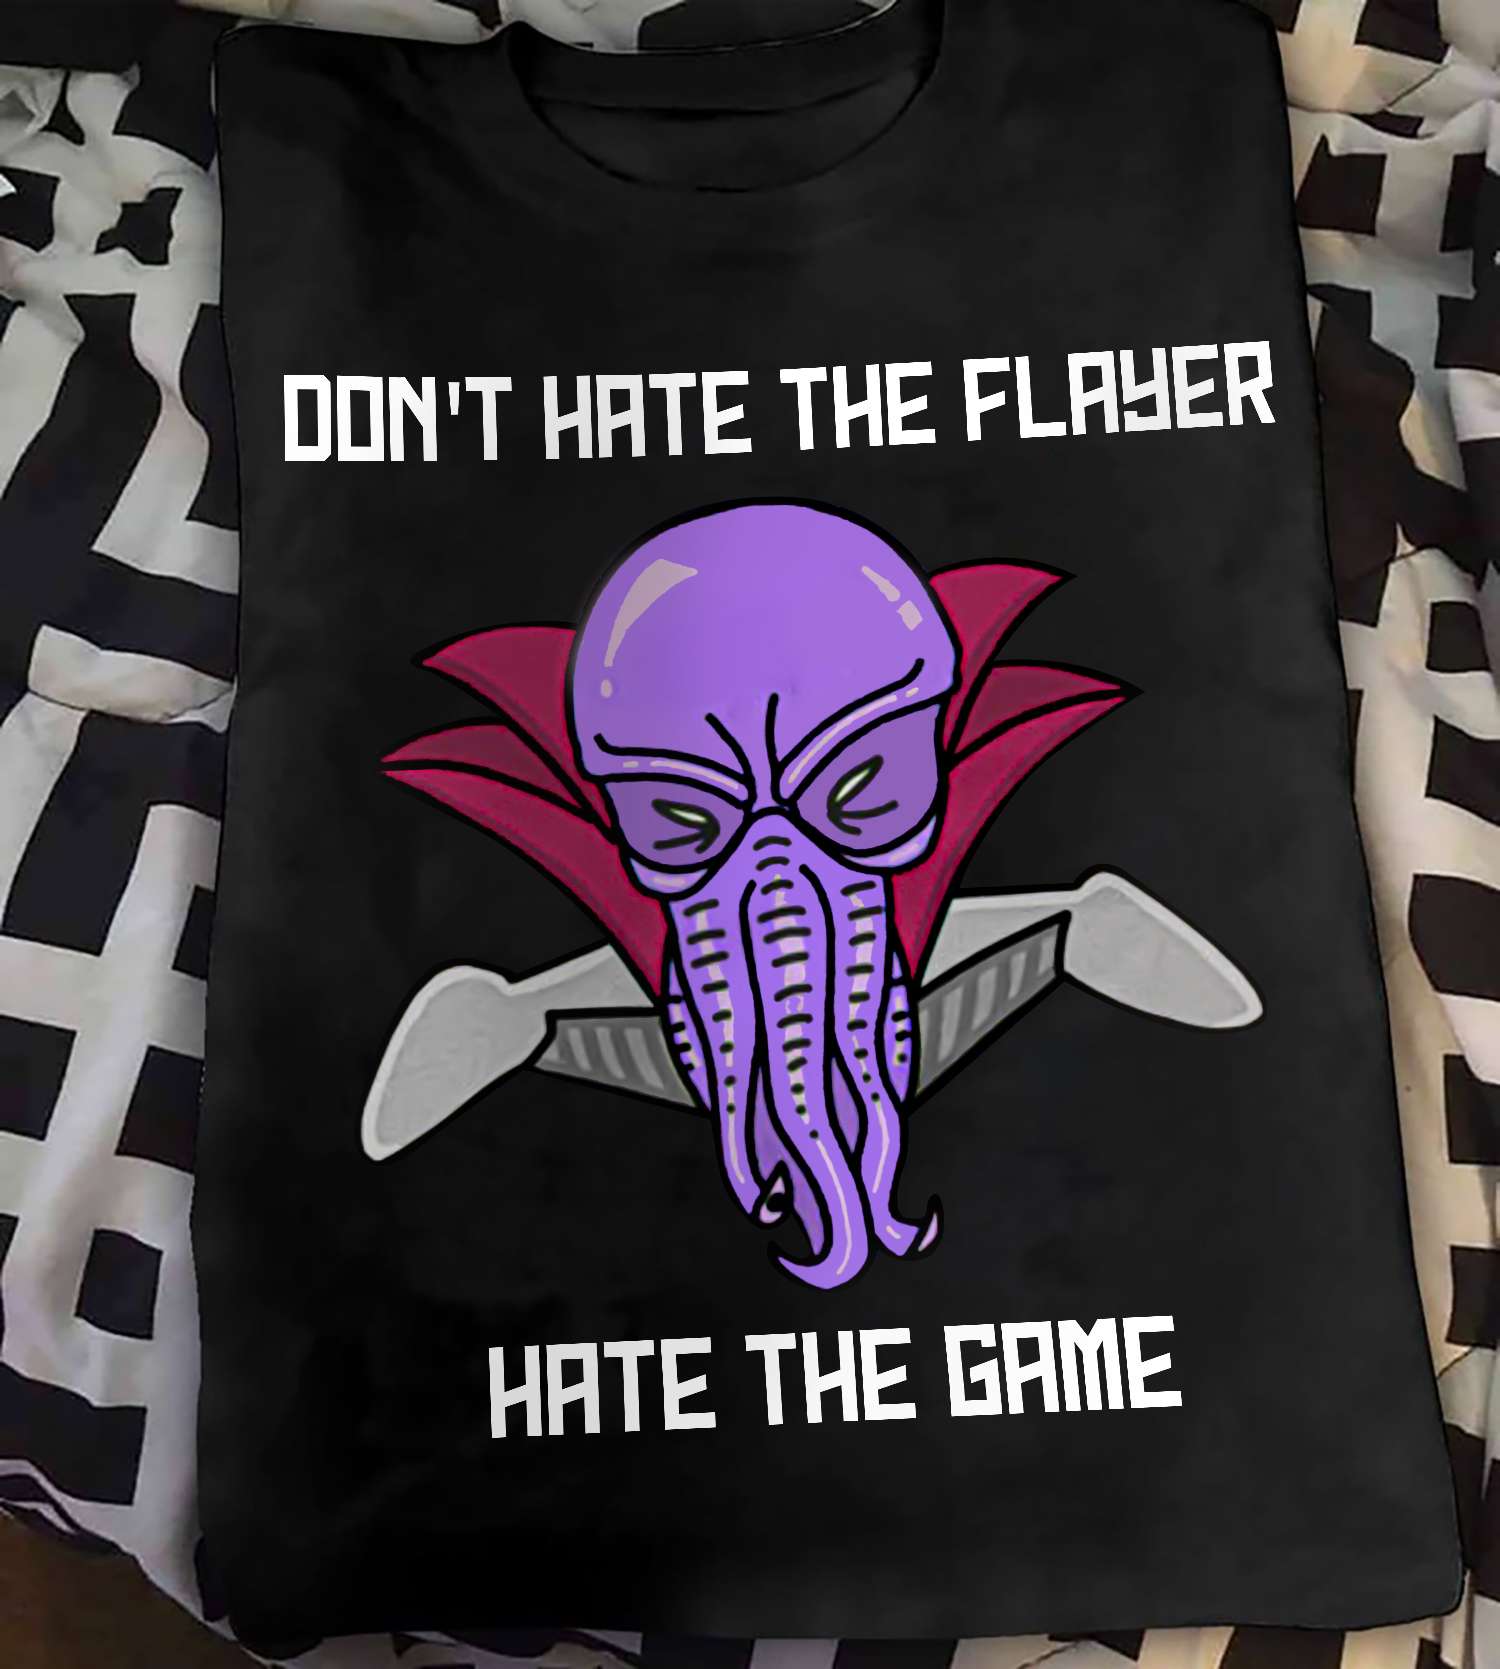 Don't hate the flayer, hate the game - Evil octopus